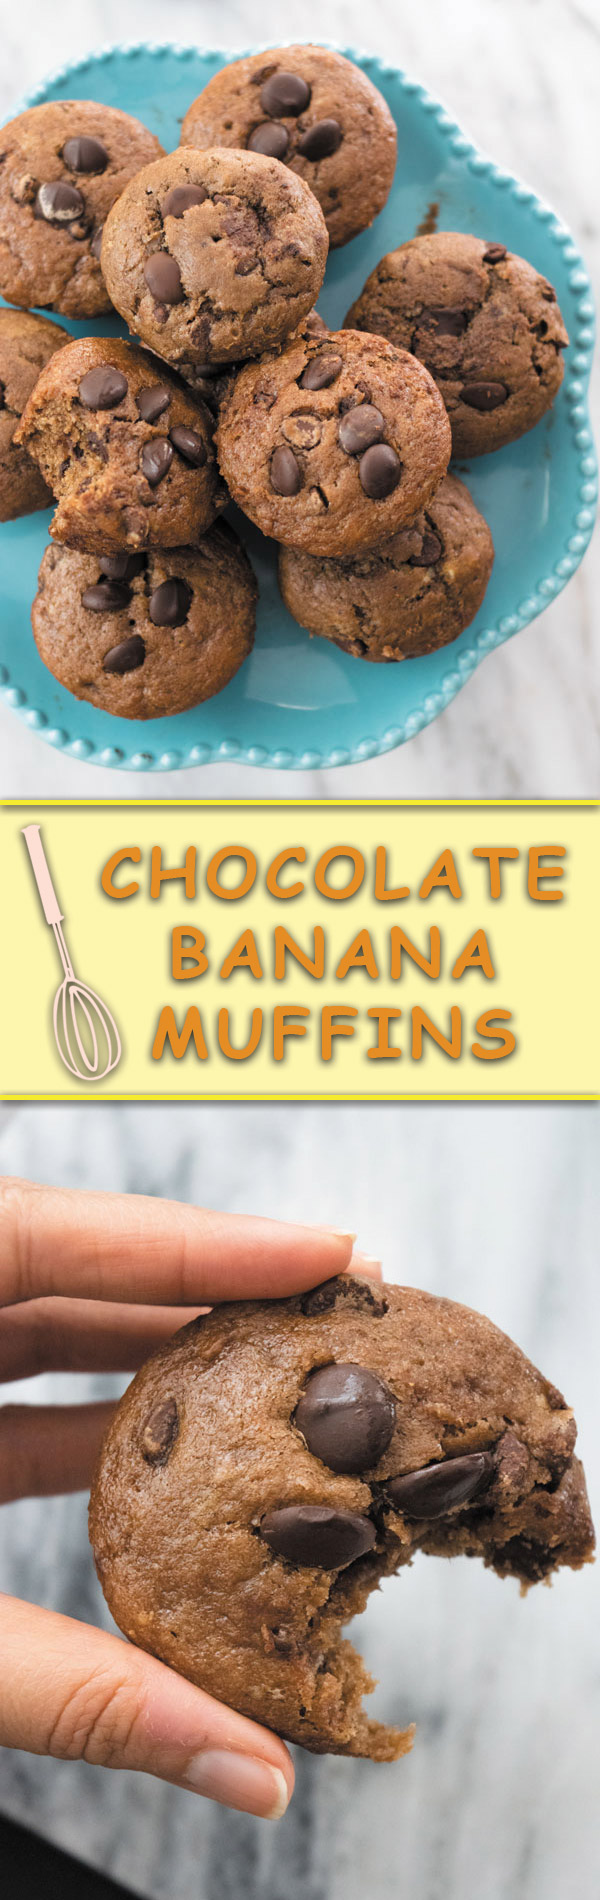 Chocolate Banana Muffins - super soft & intensely chocolatey is how I describe these Eggfree, Butterfree and dairyfree muffins!! No funny ingredients! Simple whole ingredients makes these the best banana chocolate muffins out there!